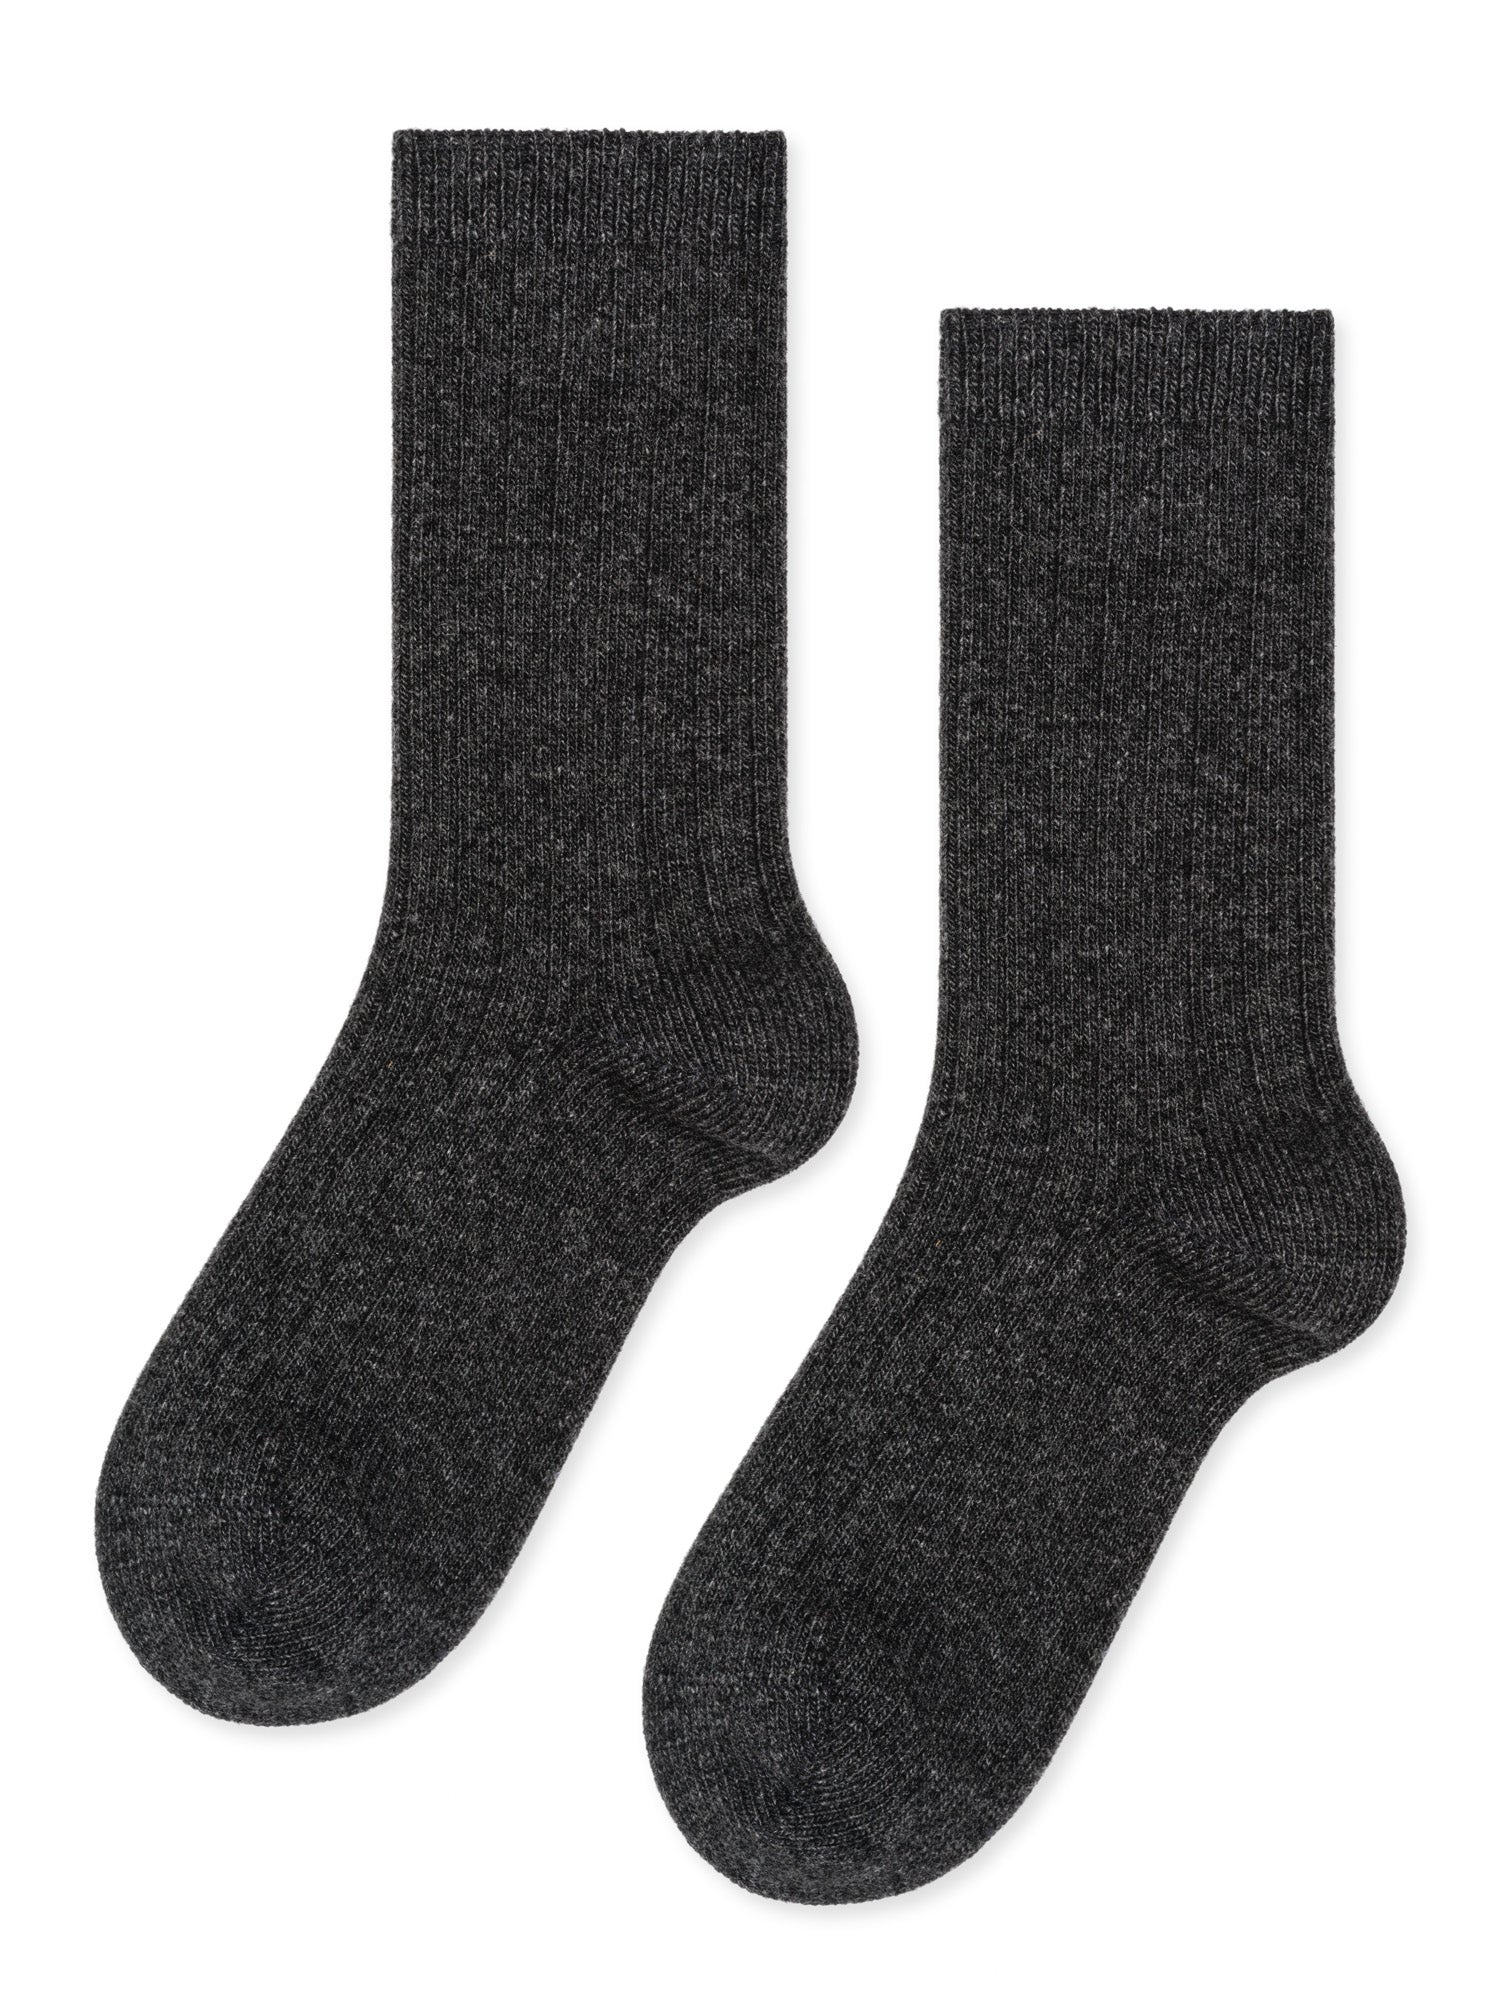 gray ribbed cashmere socks lay flat against a white background. 